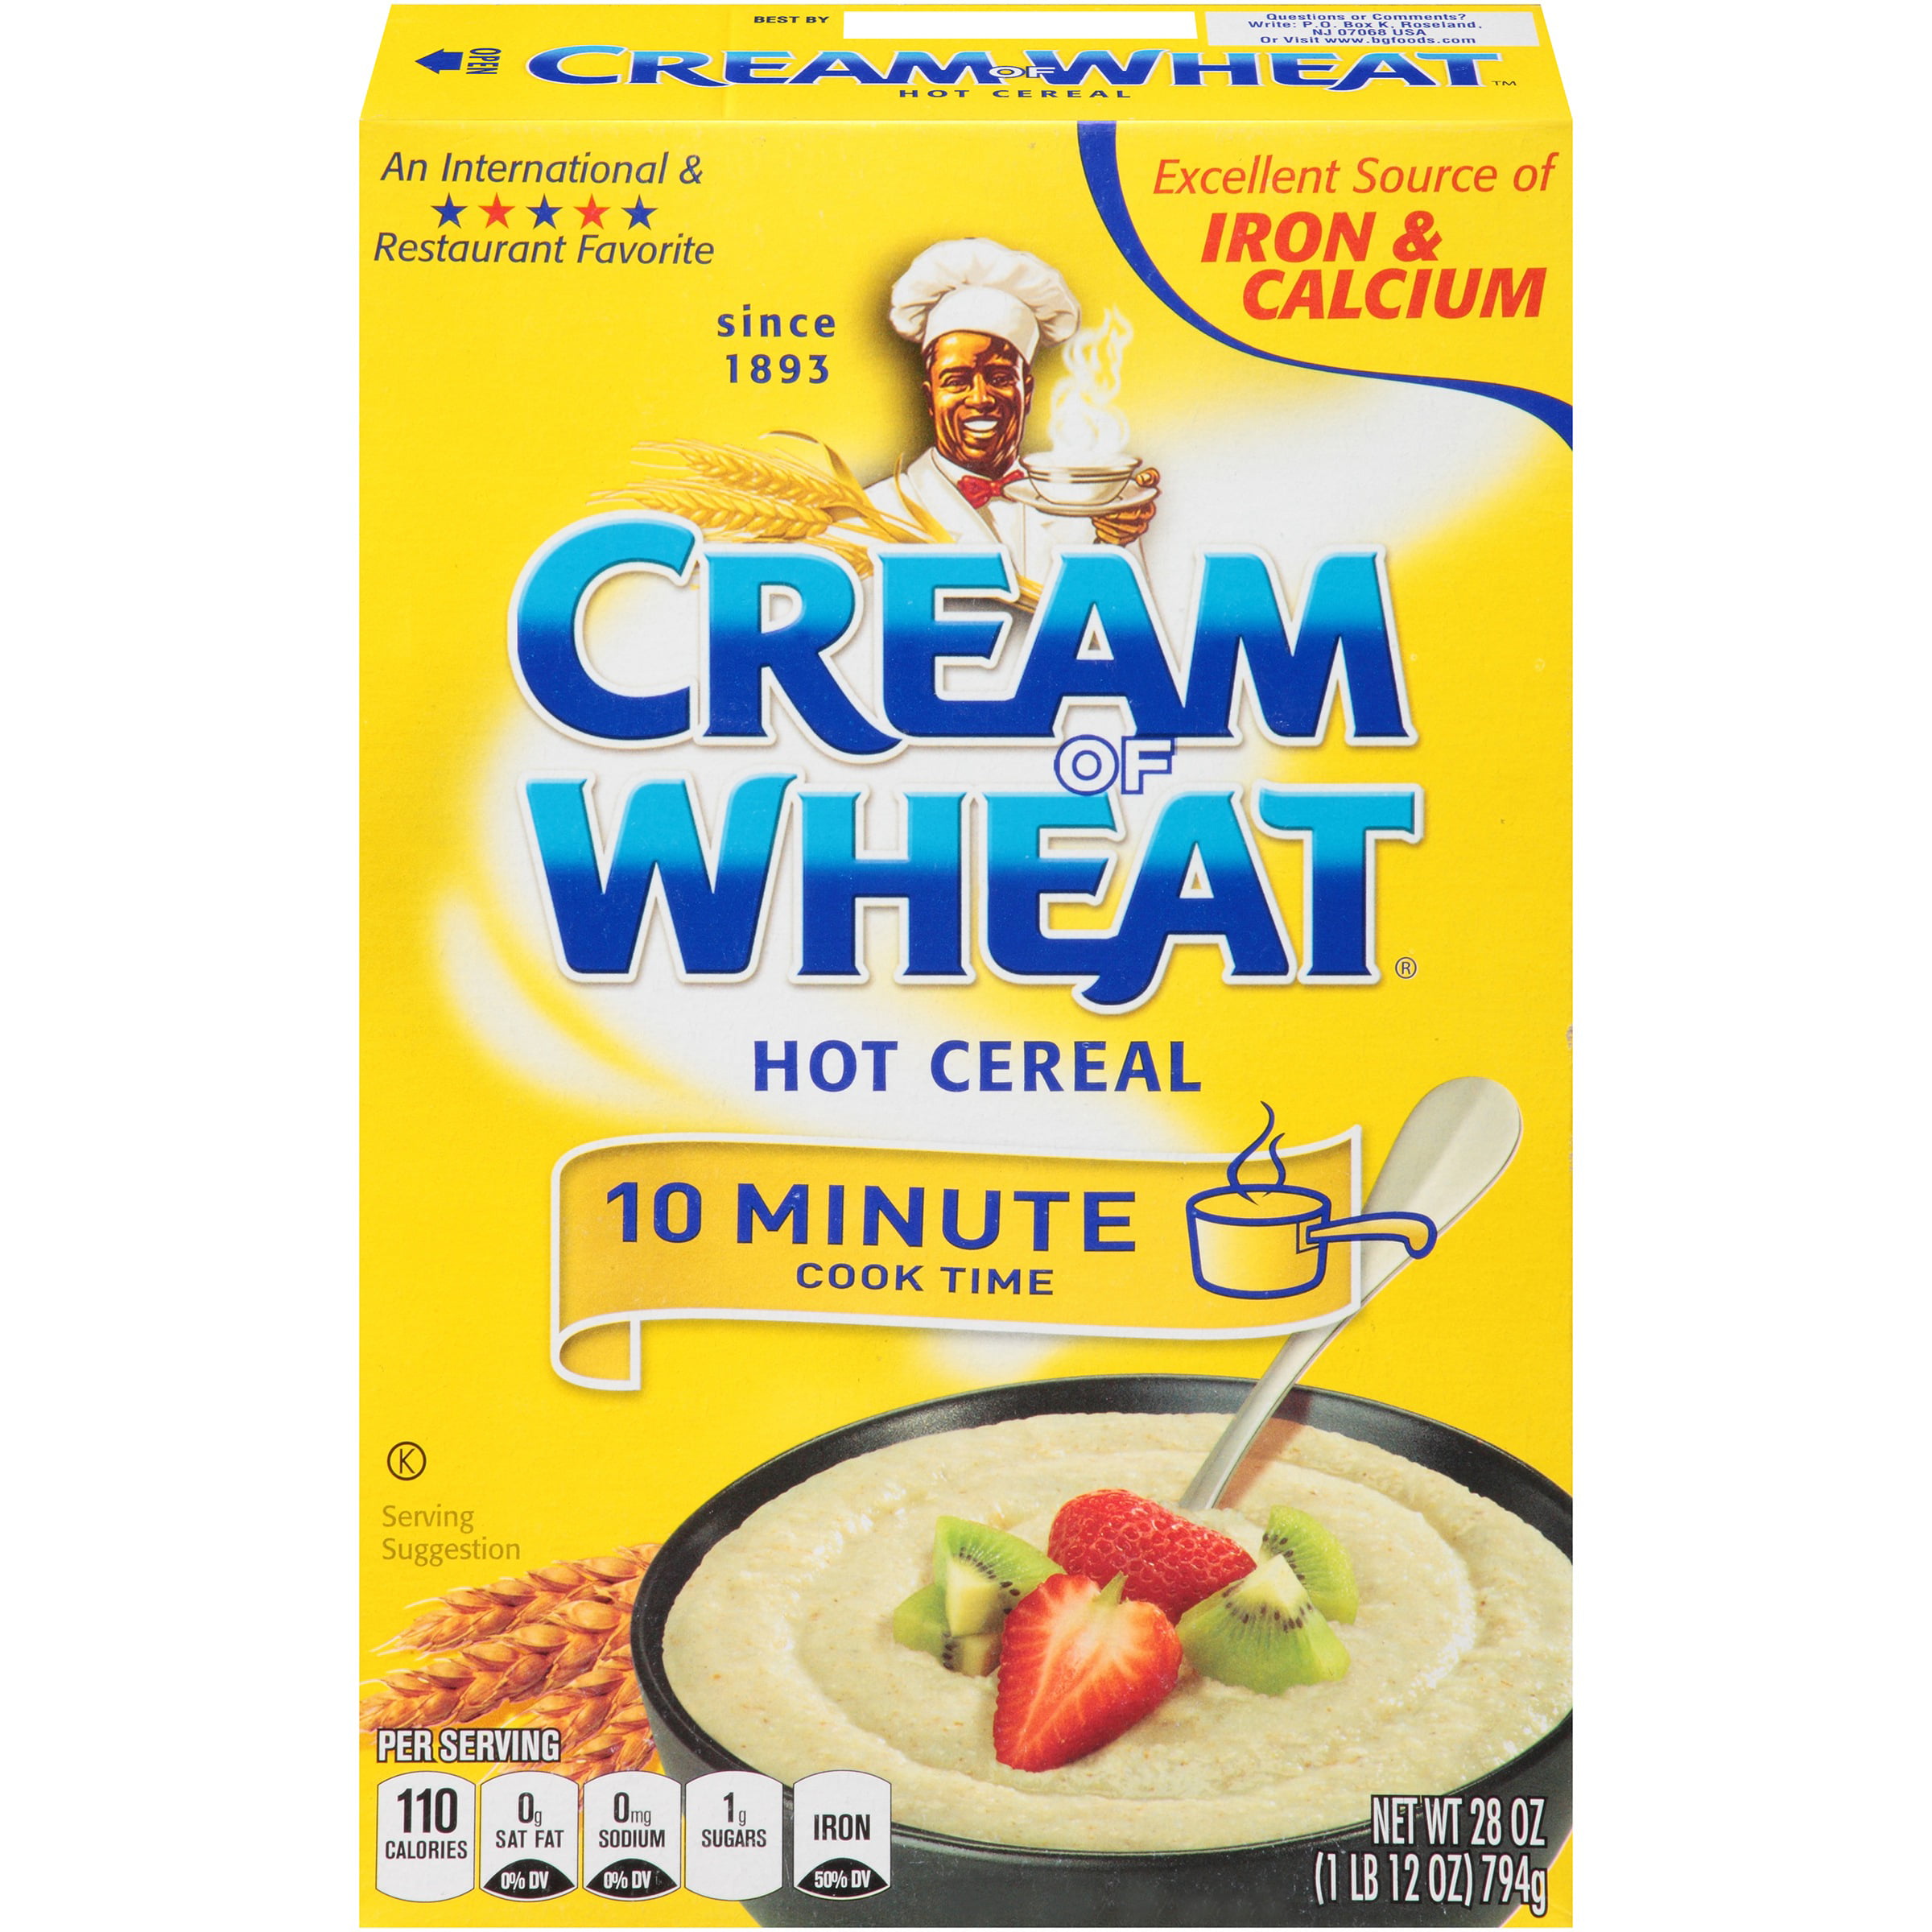 2 BAGS OF CREAM OF WHEAT CEREAL PROMO MARBLES 